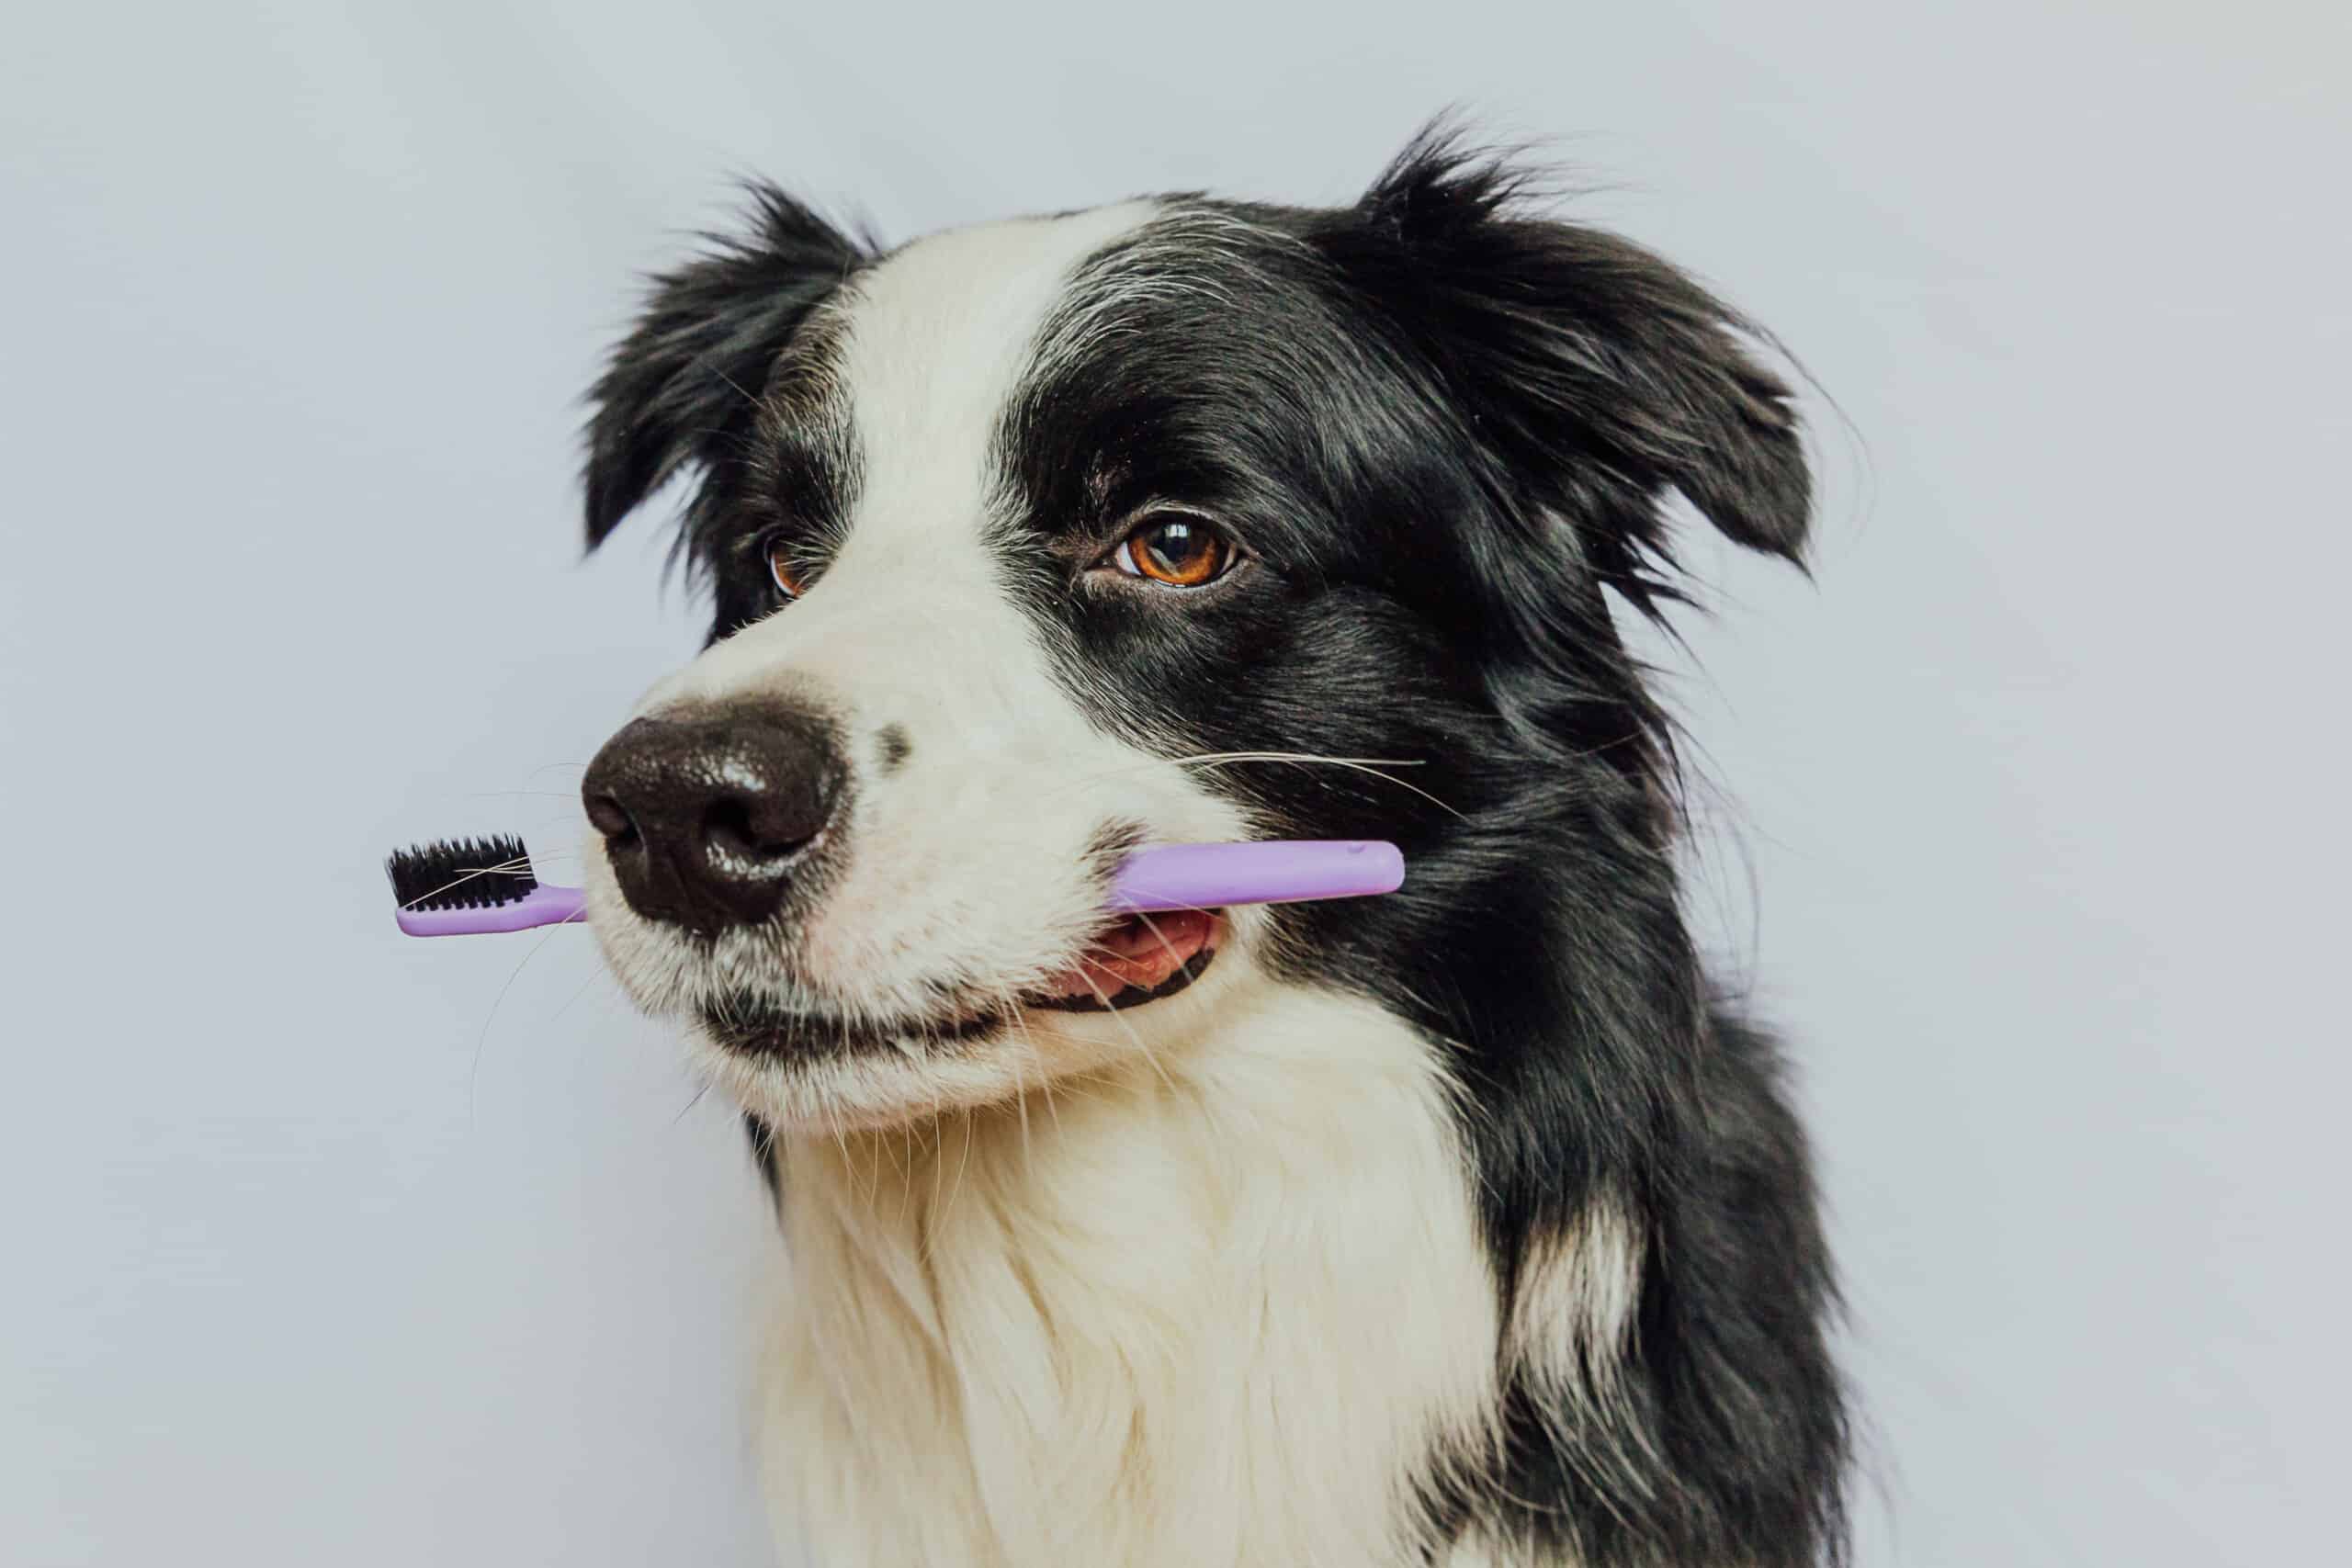 Border Collie holding toothbrush